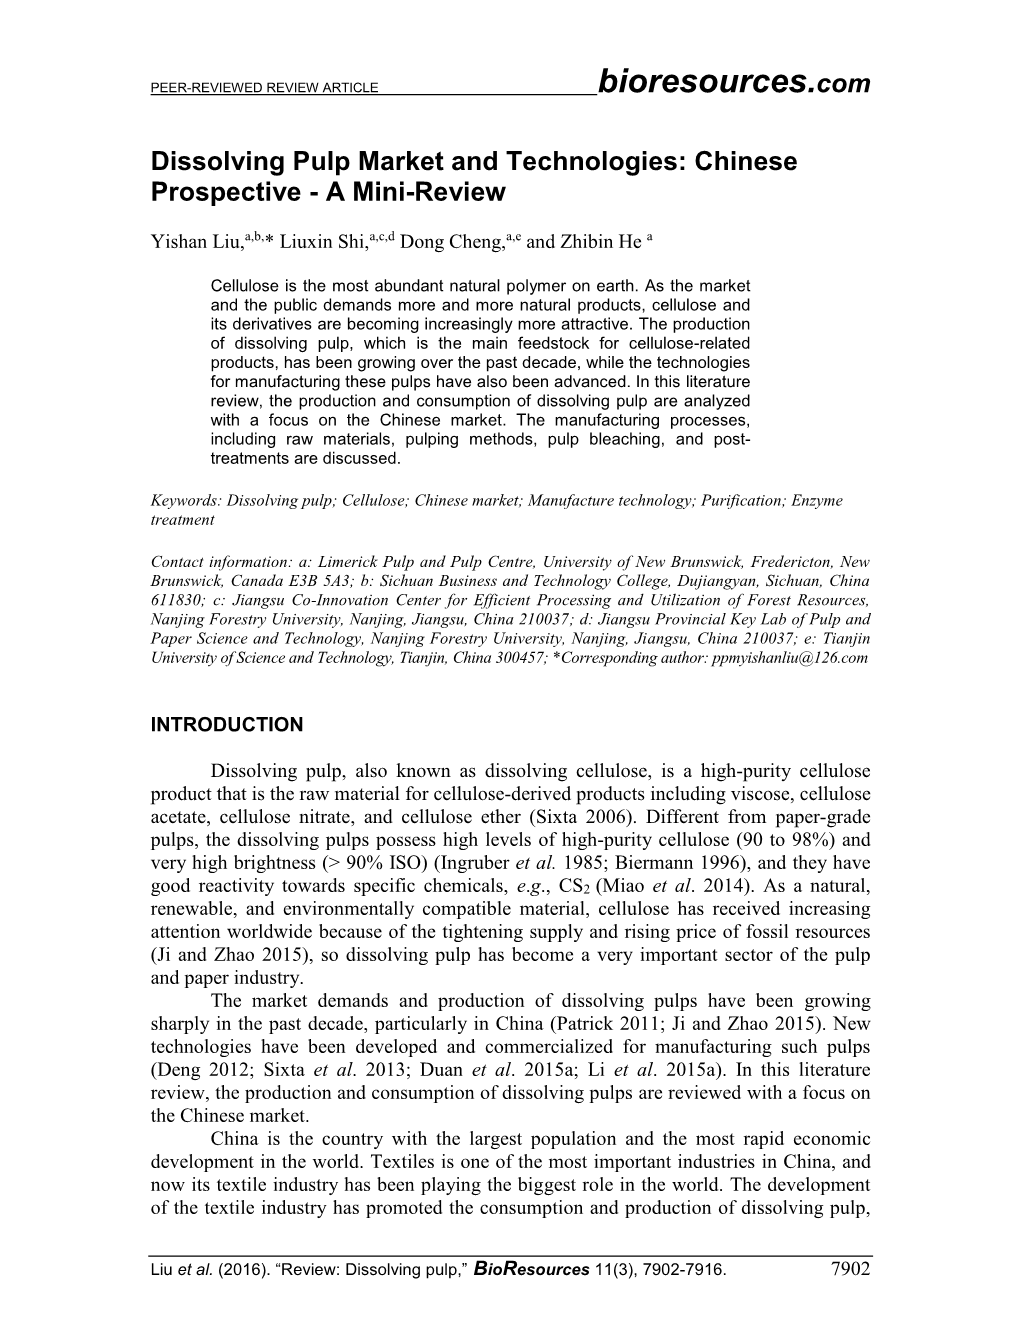 Dissolving Pulp Market and Technologies: Chinese Prospective - a Mini-Review